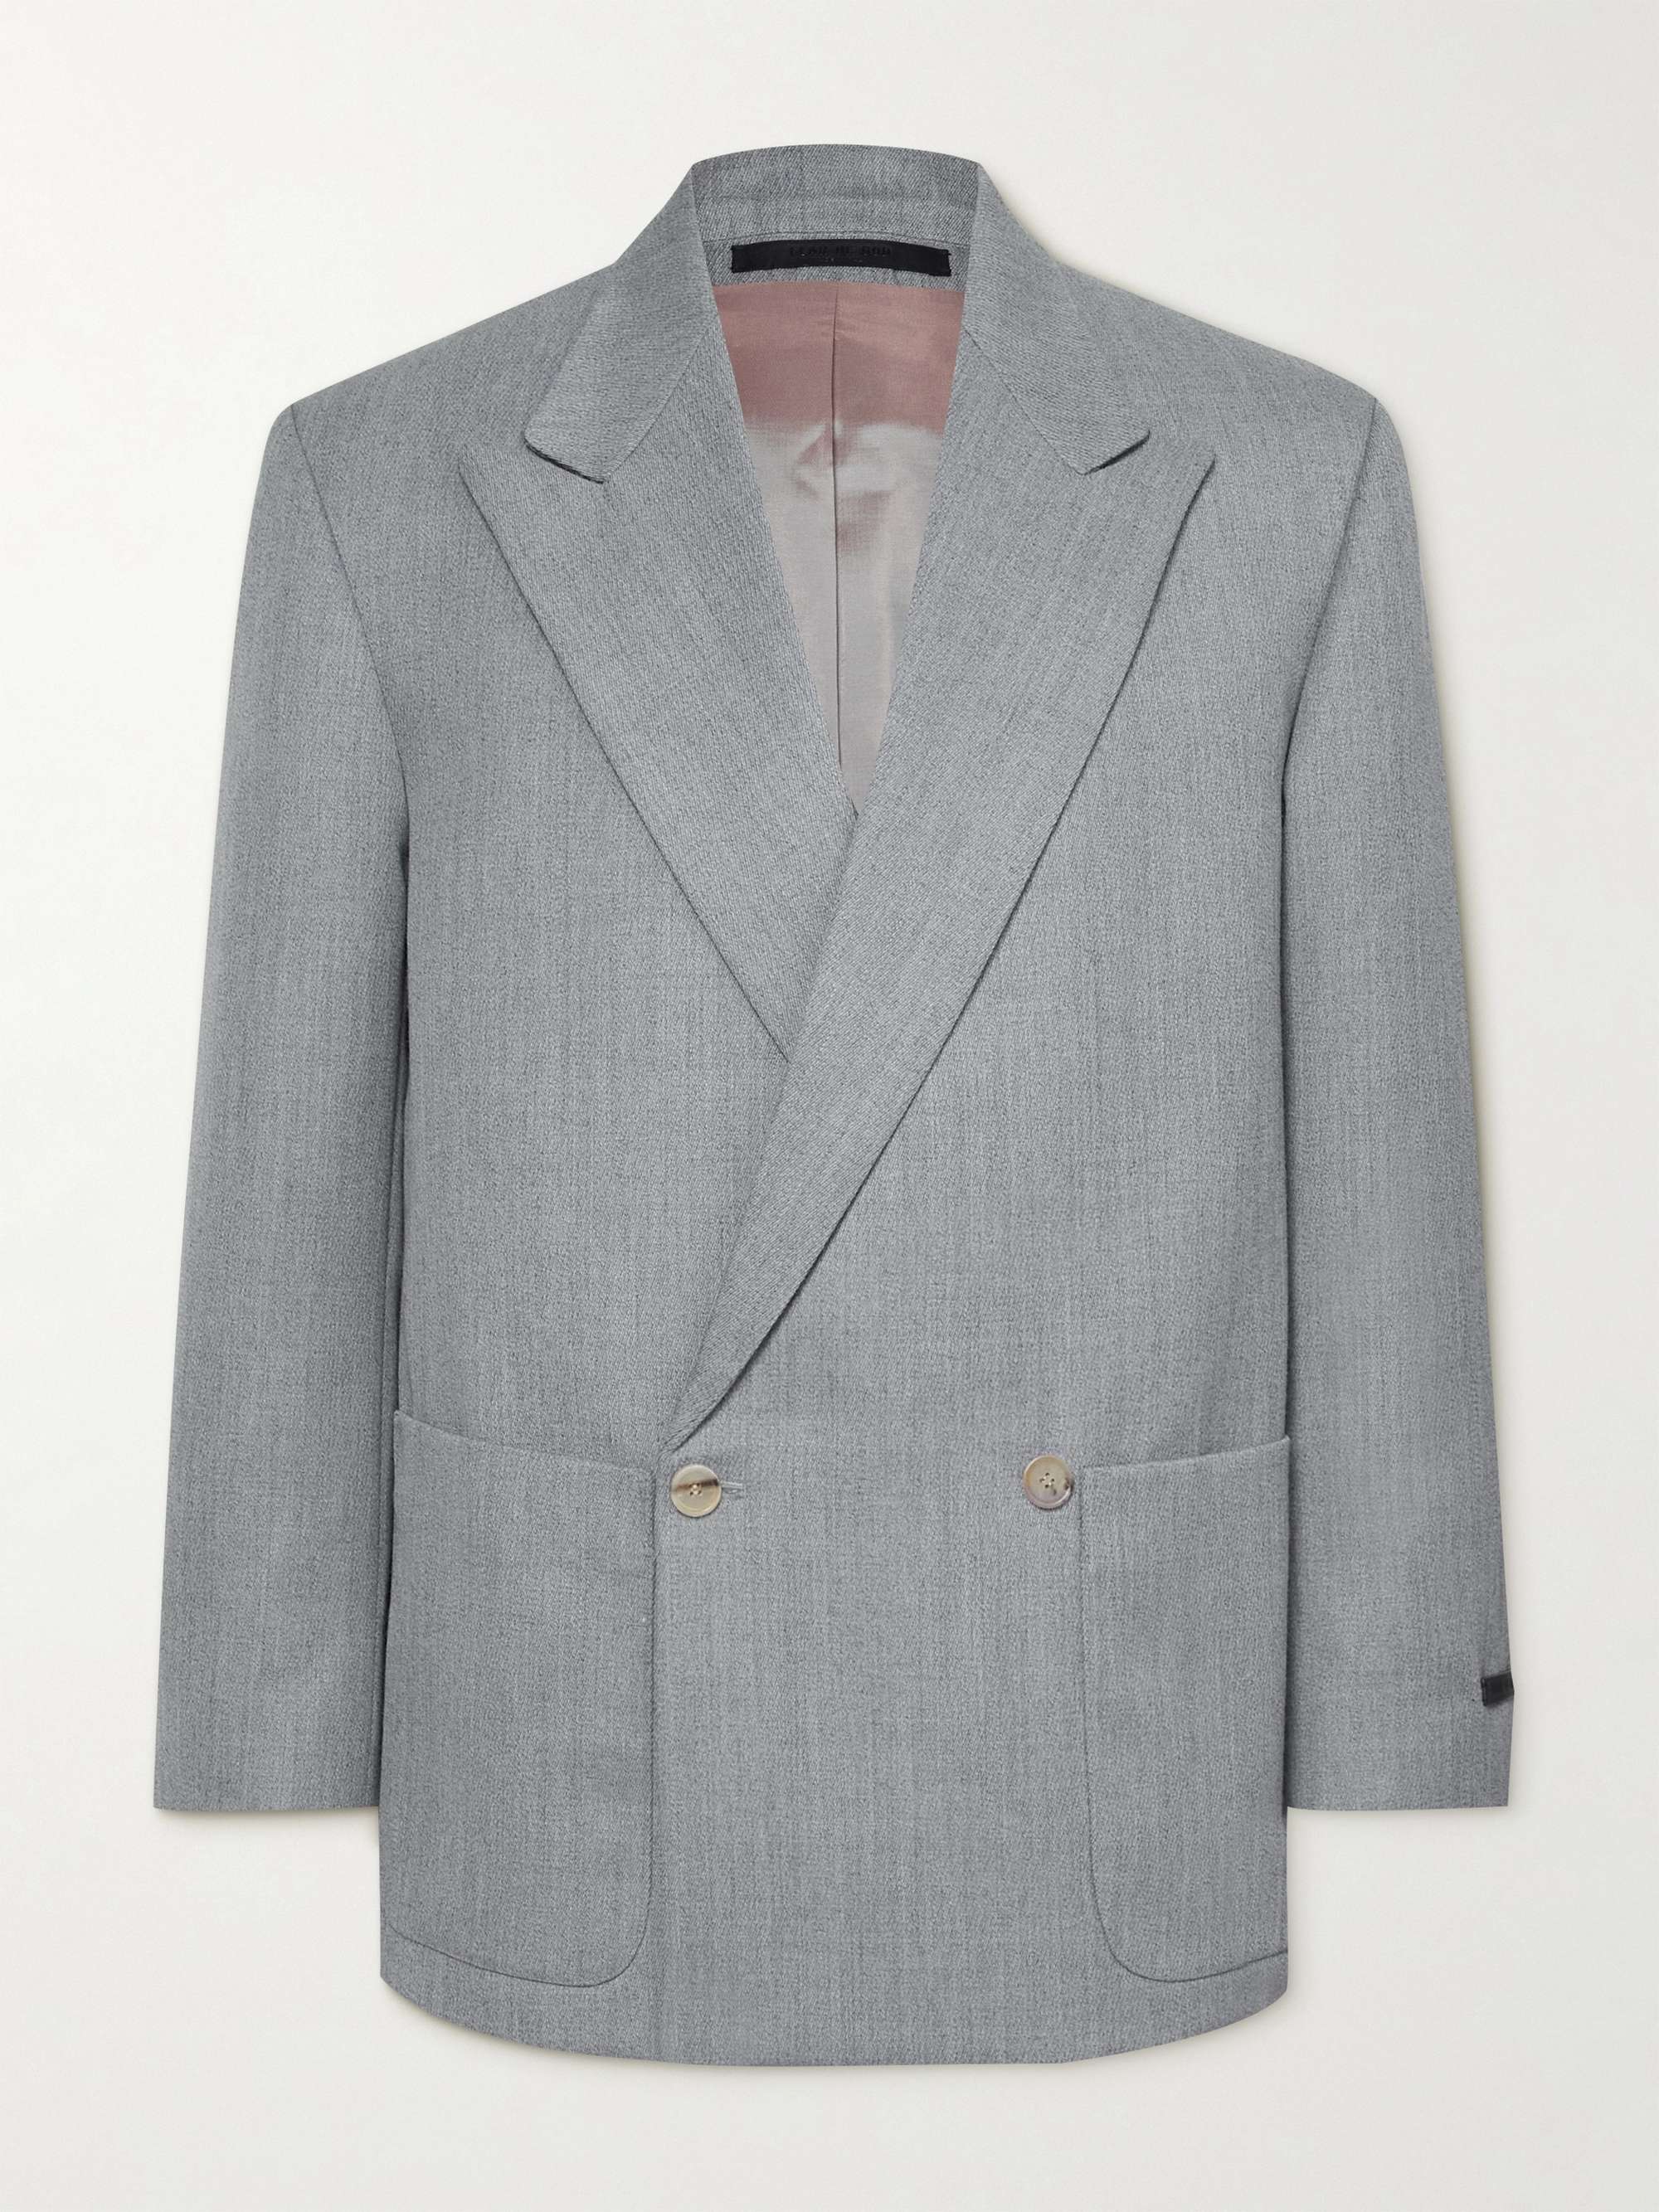 FEAR OF GOD Double-Breasted Wool Suit Jacket